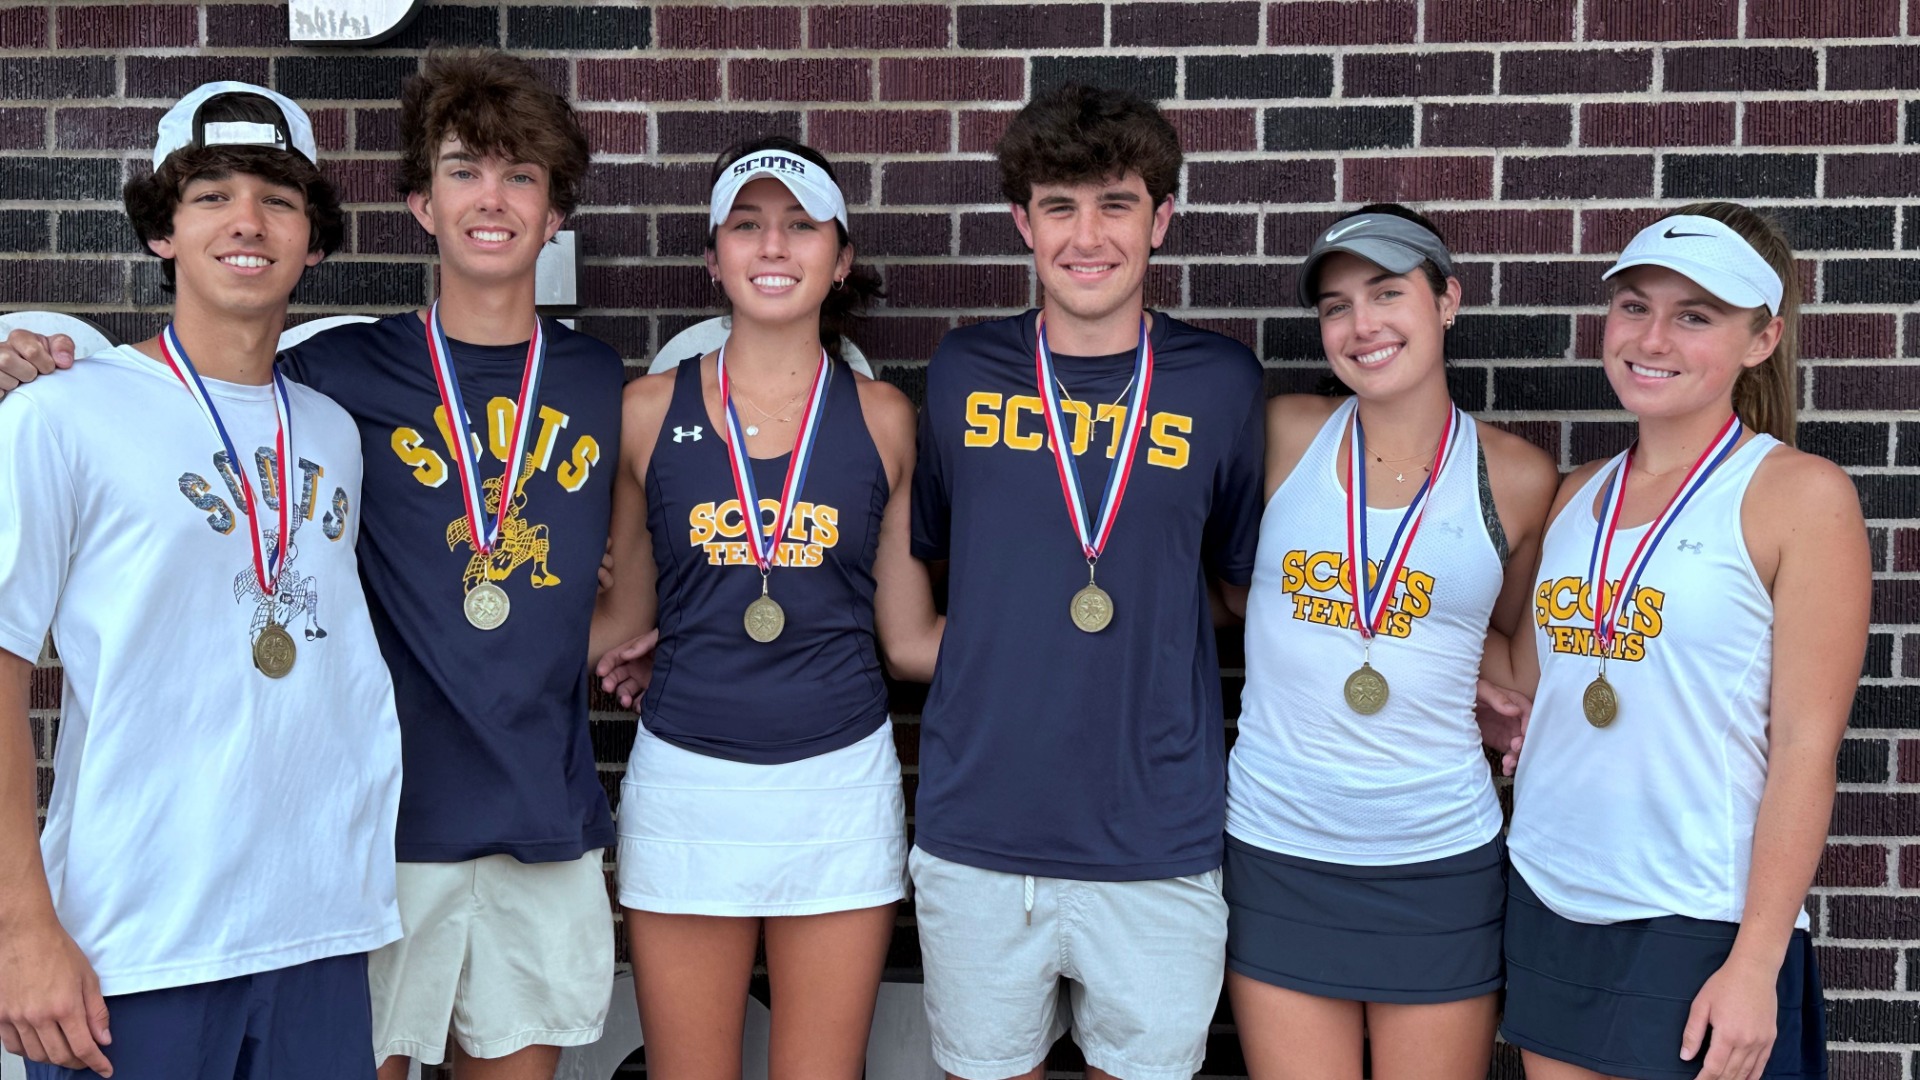 Slide 5 - Scots Varsity Tennis Team Competes Well at District Tournament